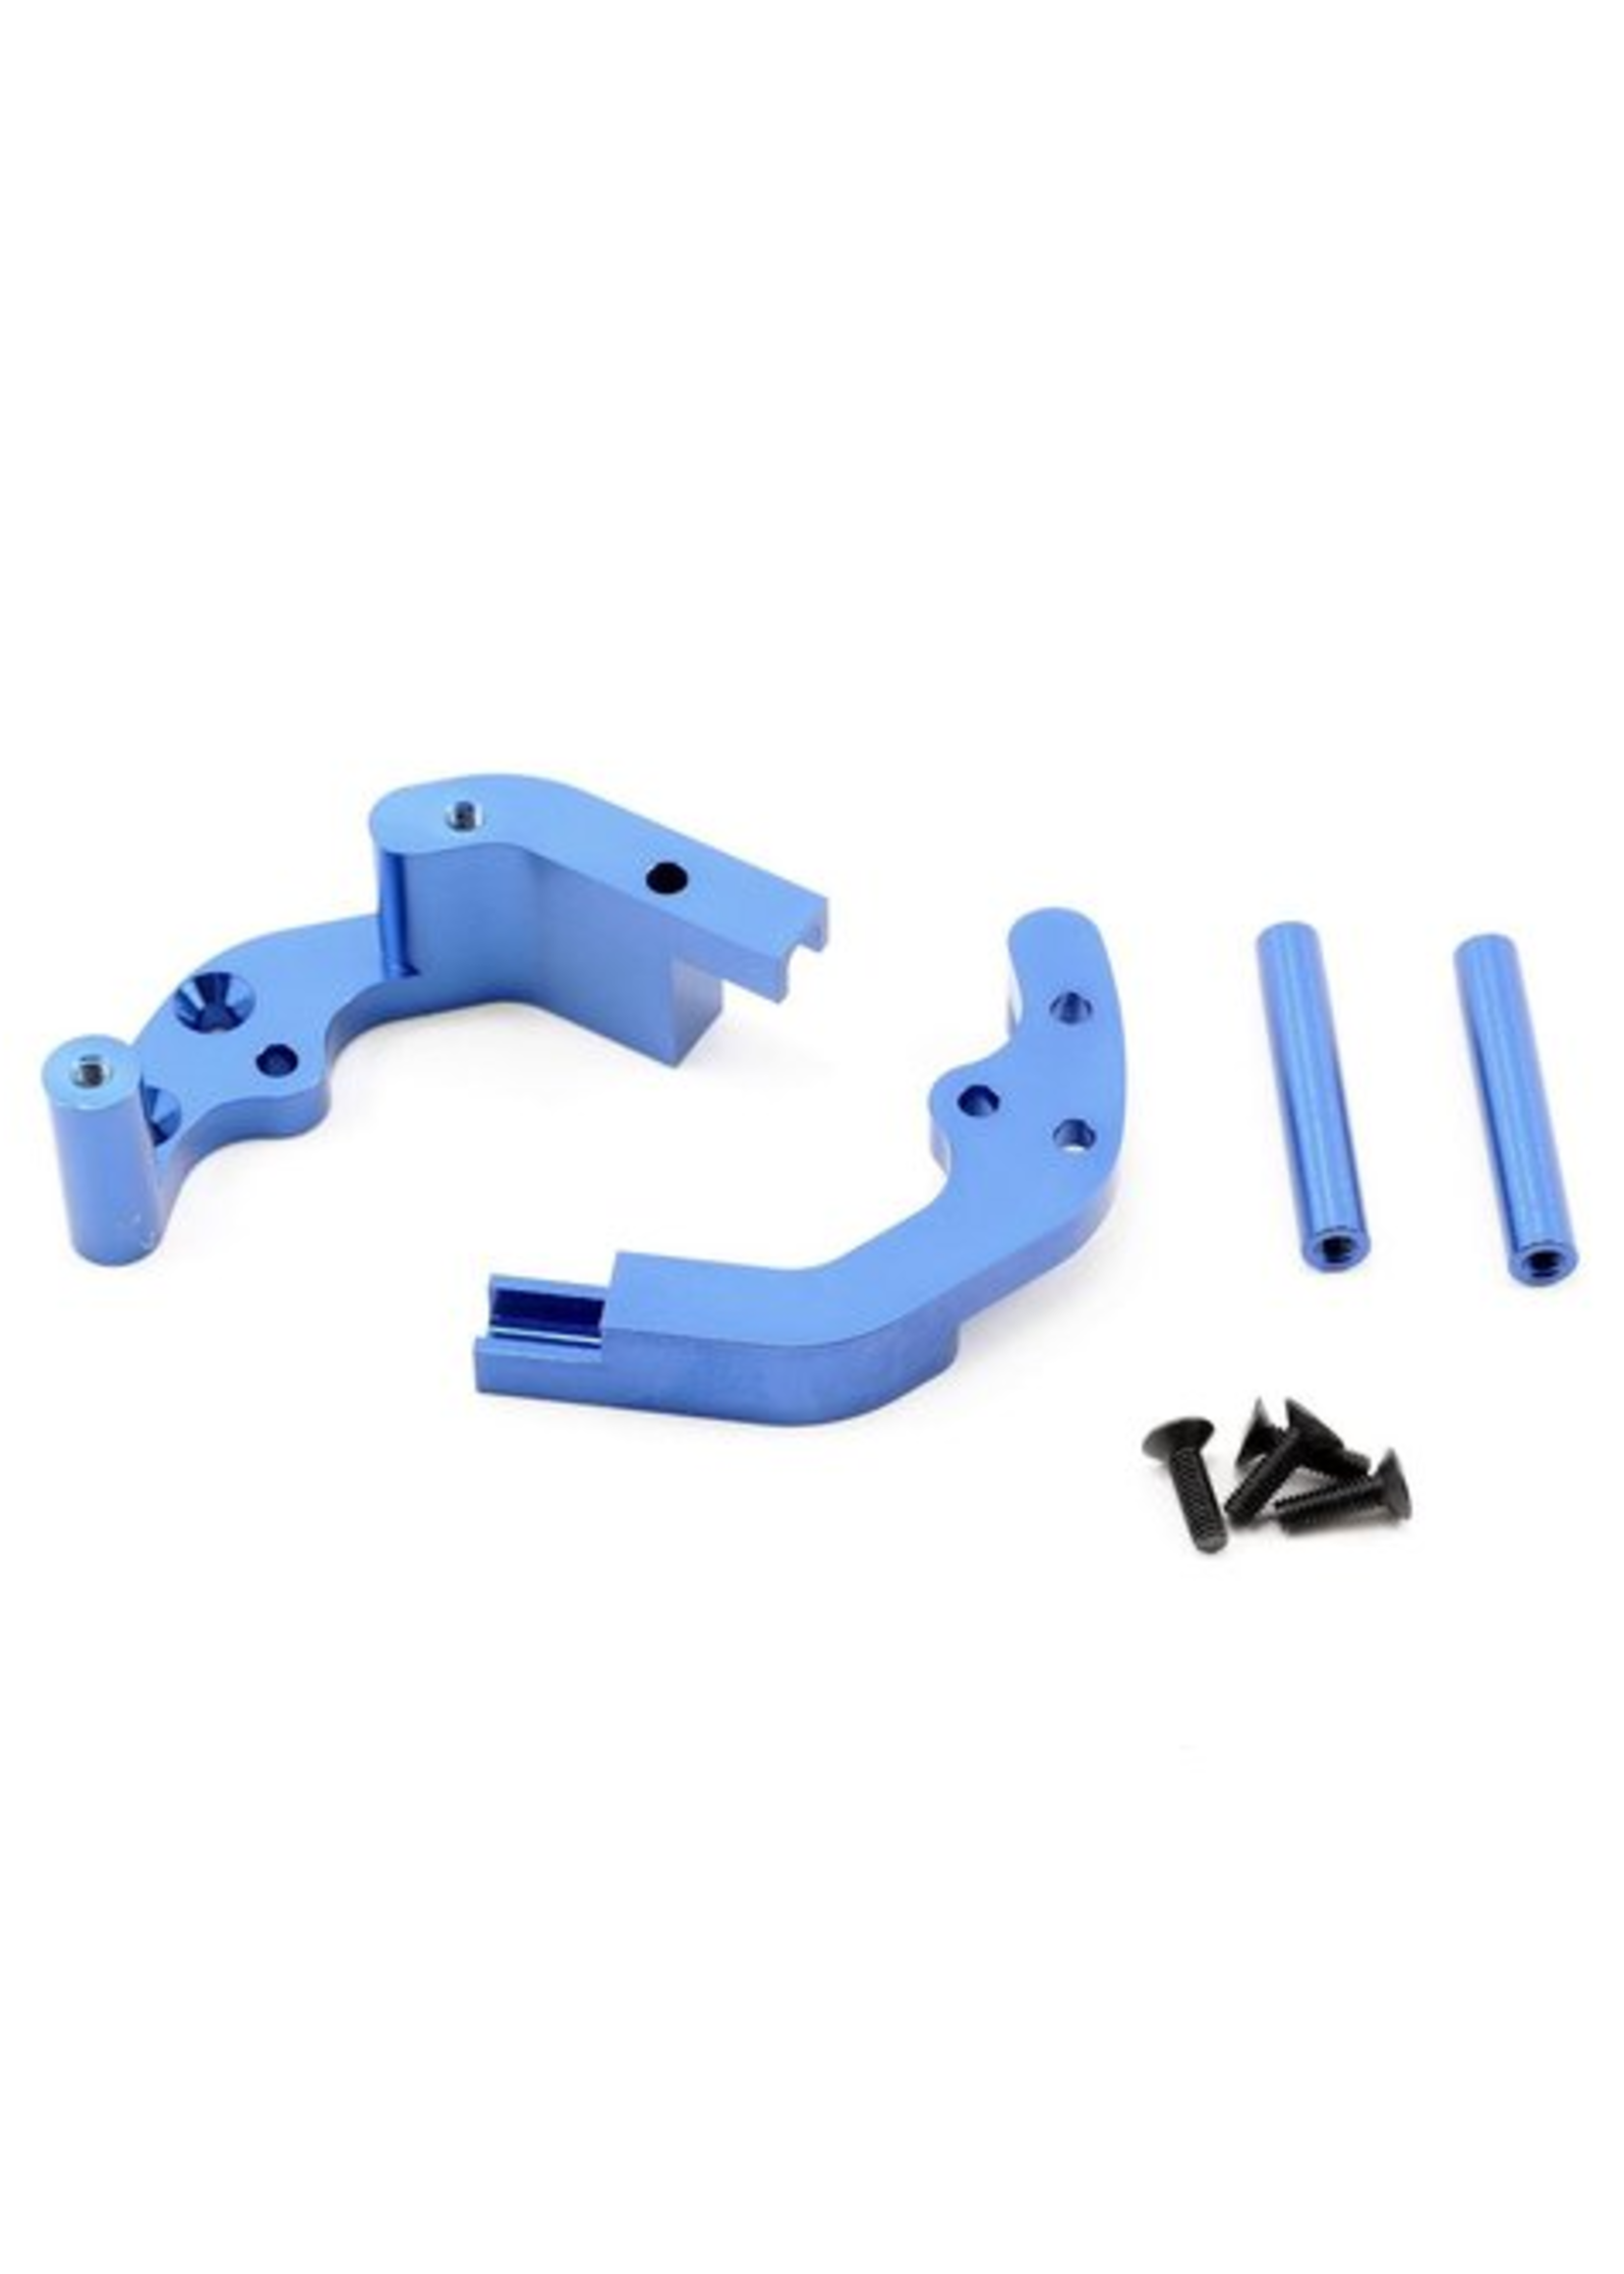 ST Racing Concepts SPTST3677B ST Racing Concepts CNC Machined Aluminum Rear Motor Guard for Traxxas cars/trucks (Blue)